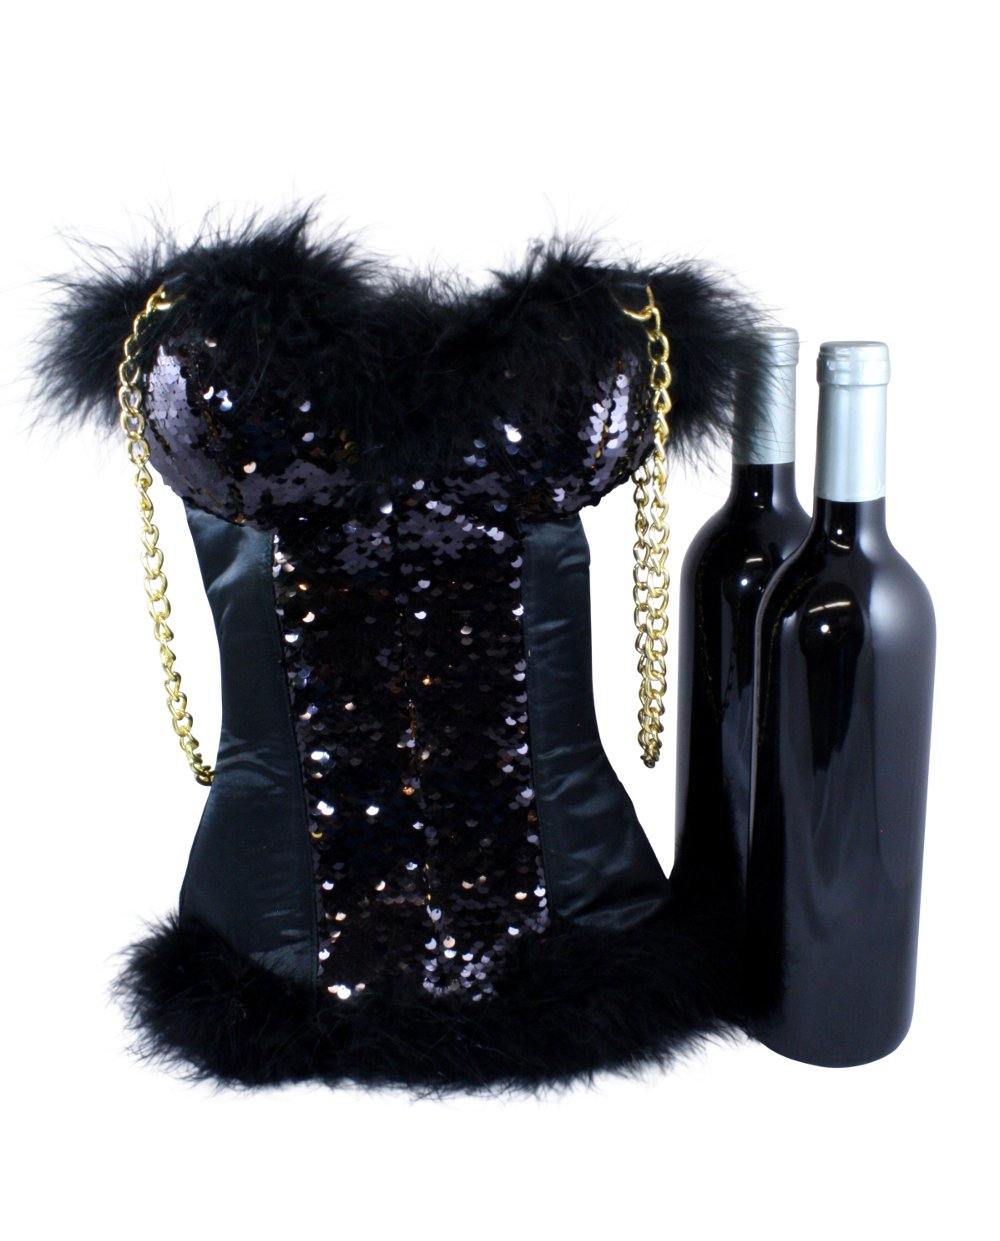 Corset Wine Bag for 2 Bottles in Reversible Black/Gold Sequins by Tipsy Totes